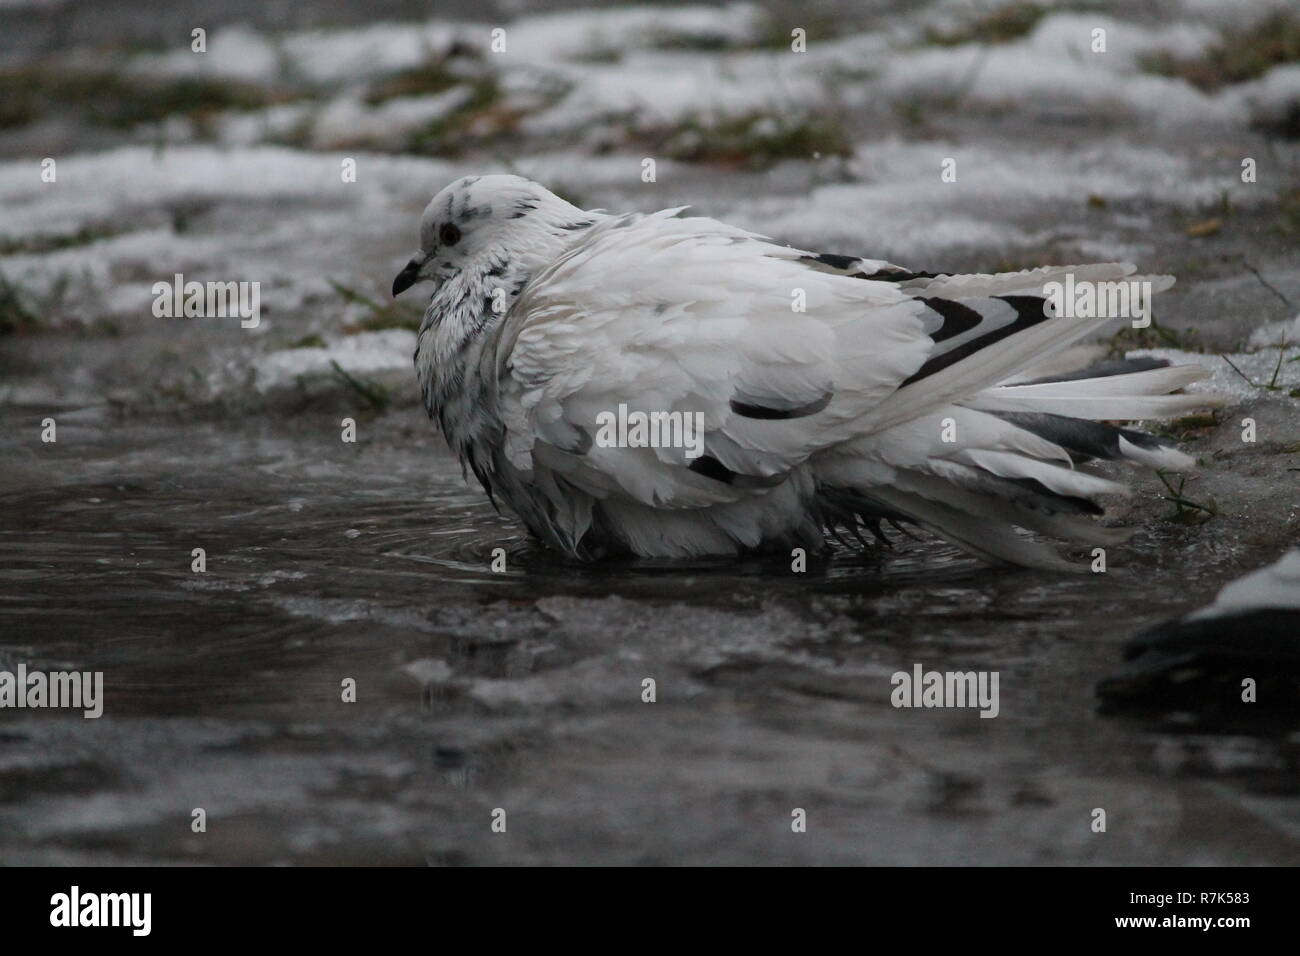 pigeon bird take cold bath in ice water in winter day Stock Photo